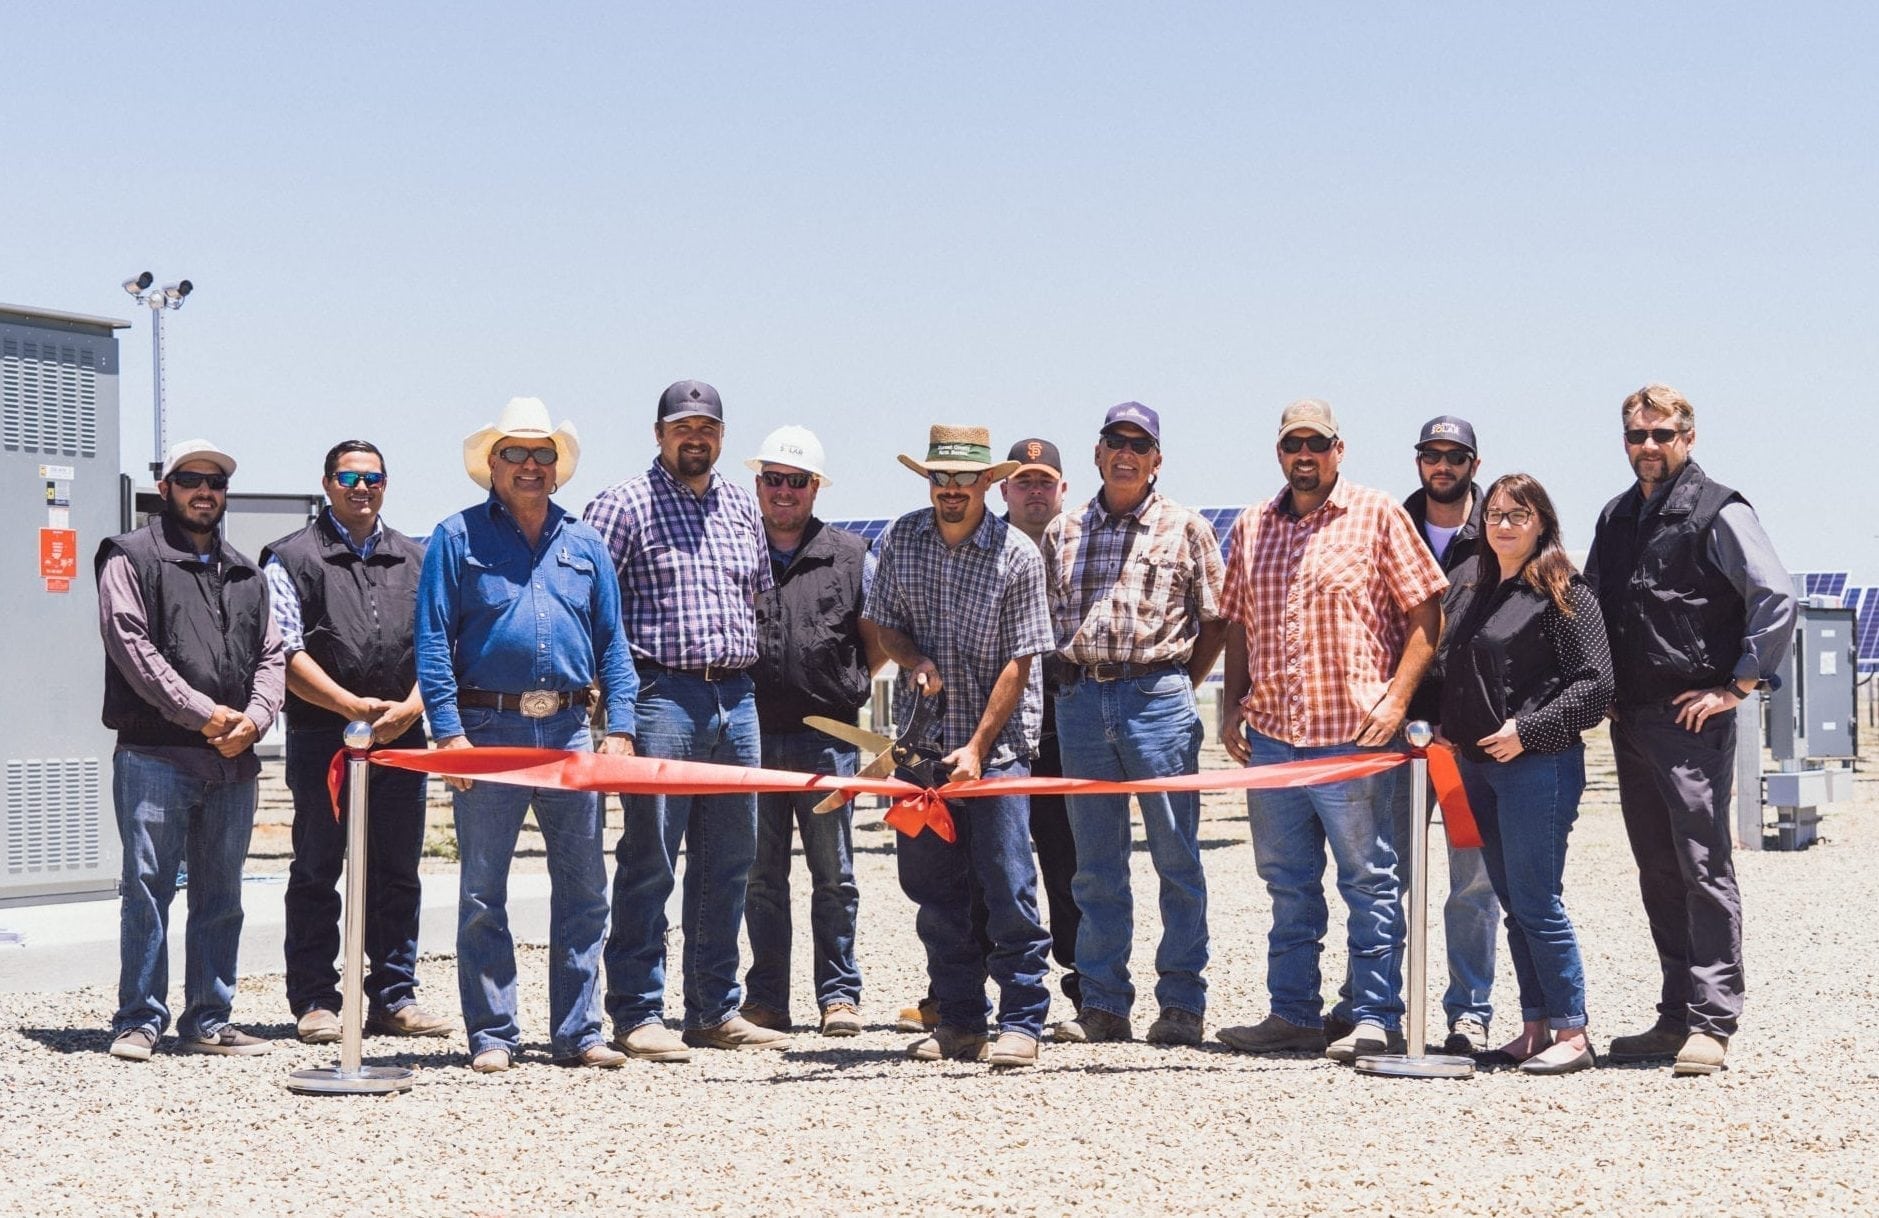 A group of employees from Pedretti Ranch in El Nido, California standing at the ribbon cutting ceremony in front of their new solar system.